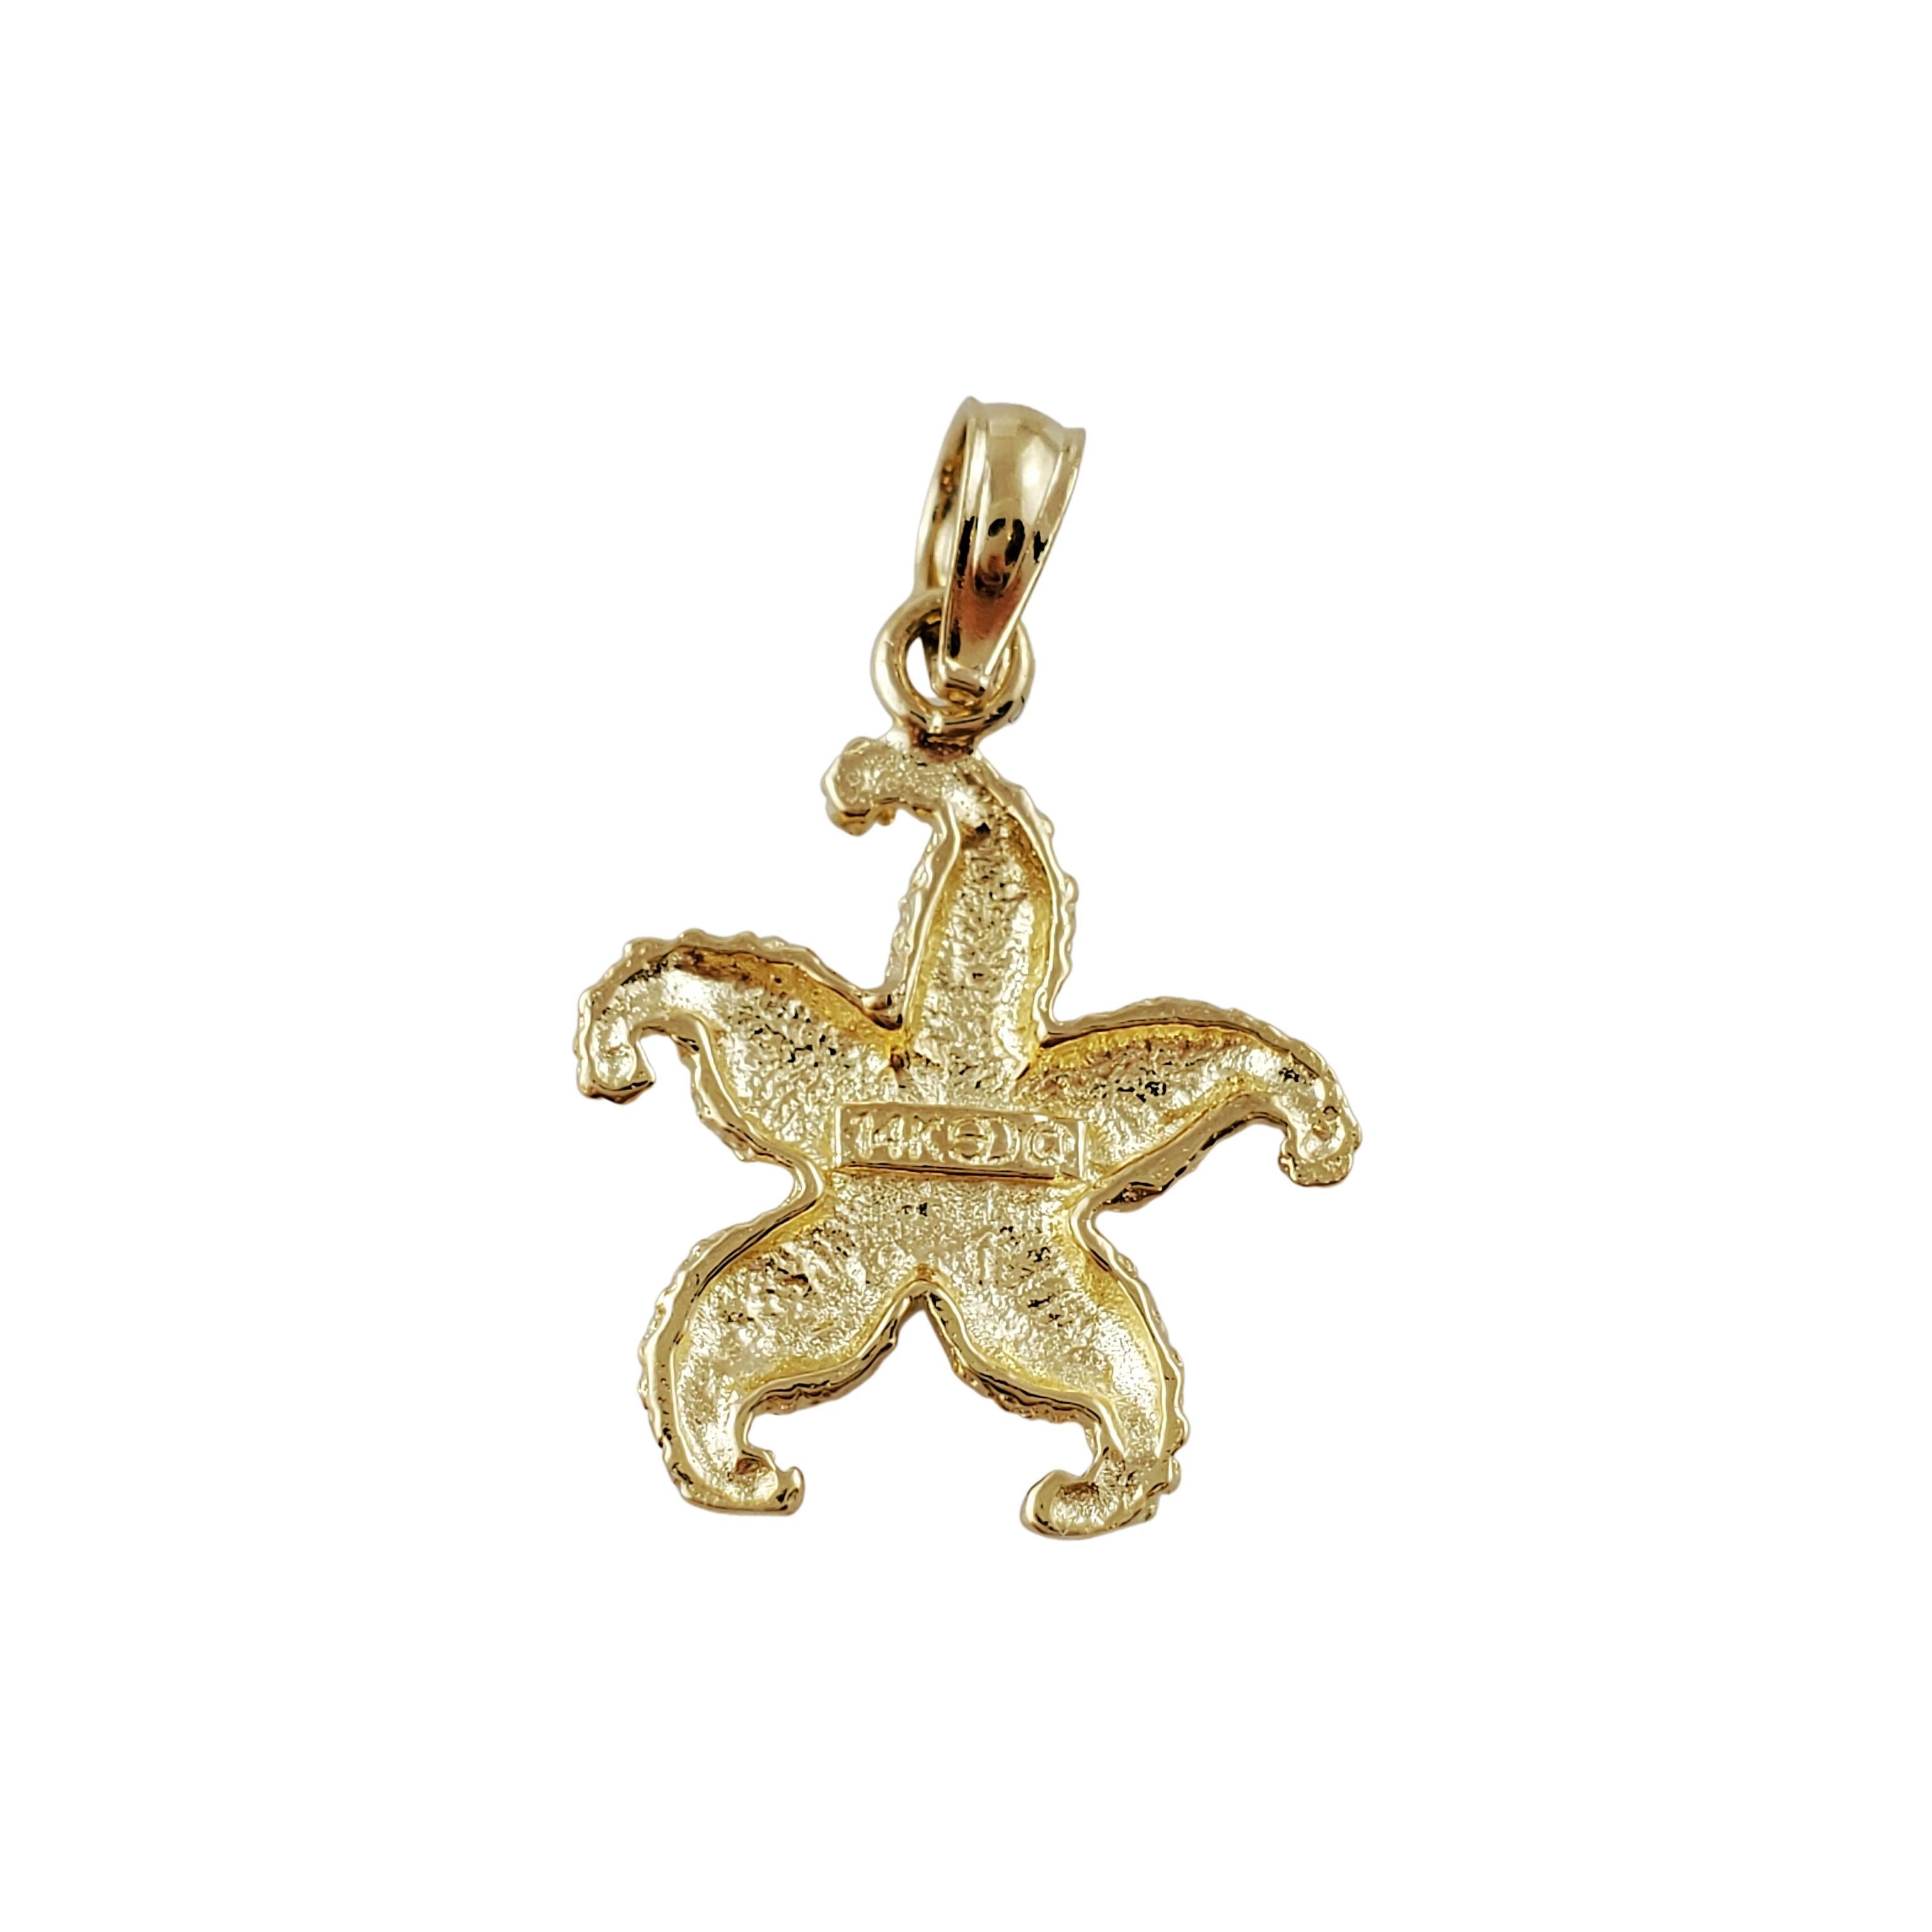 Vintage 14K Yellow Gold Star Fish Charm

Beautiful star fish charm is crafted in 14k yellow gold and includes detailing as far as texture and curvature of the legs depicting a real star fish.

Size: 17mm X 14mm

Weight: 1.10 gr / 0.7 dwt

Hallmark: